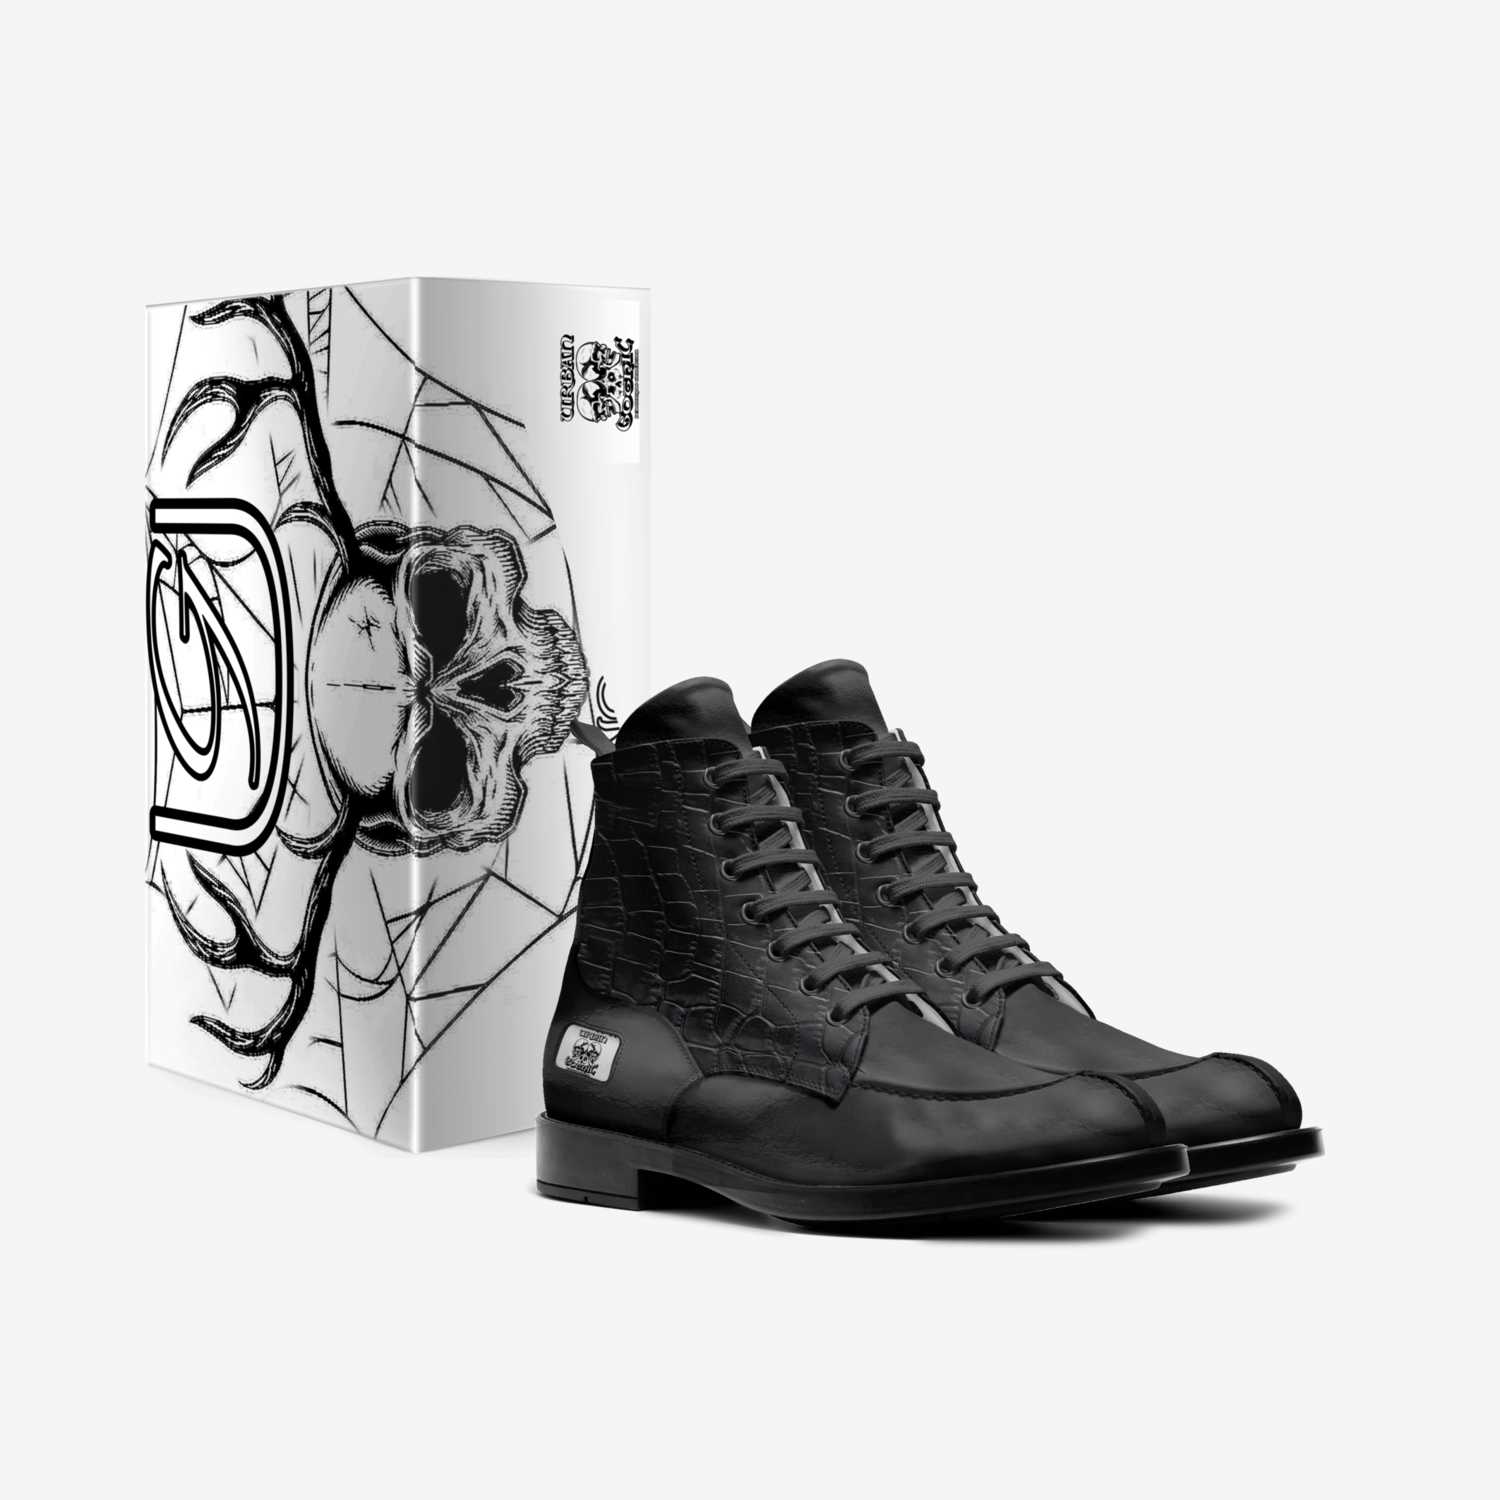 UrbanGothic Steel custom made in Italy shoes by Delano Varner | Box view